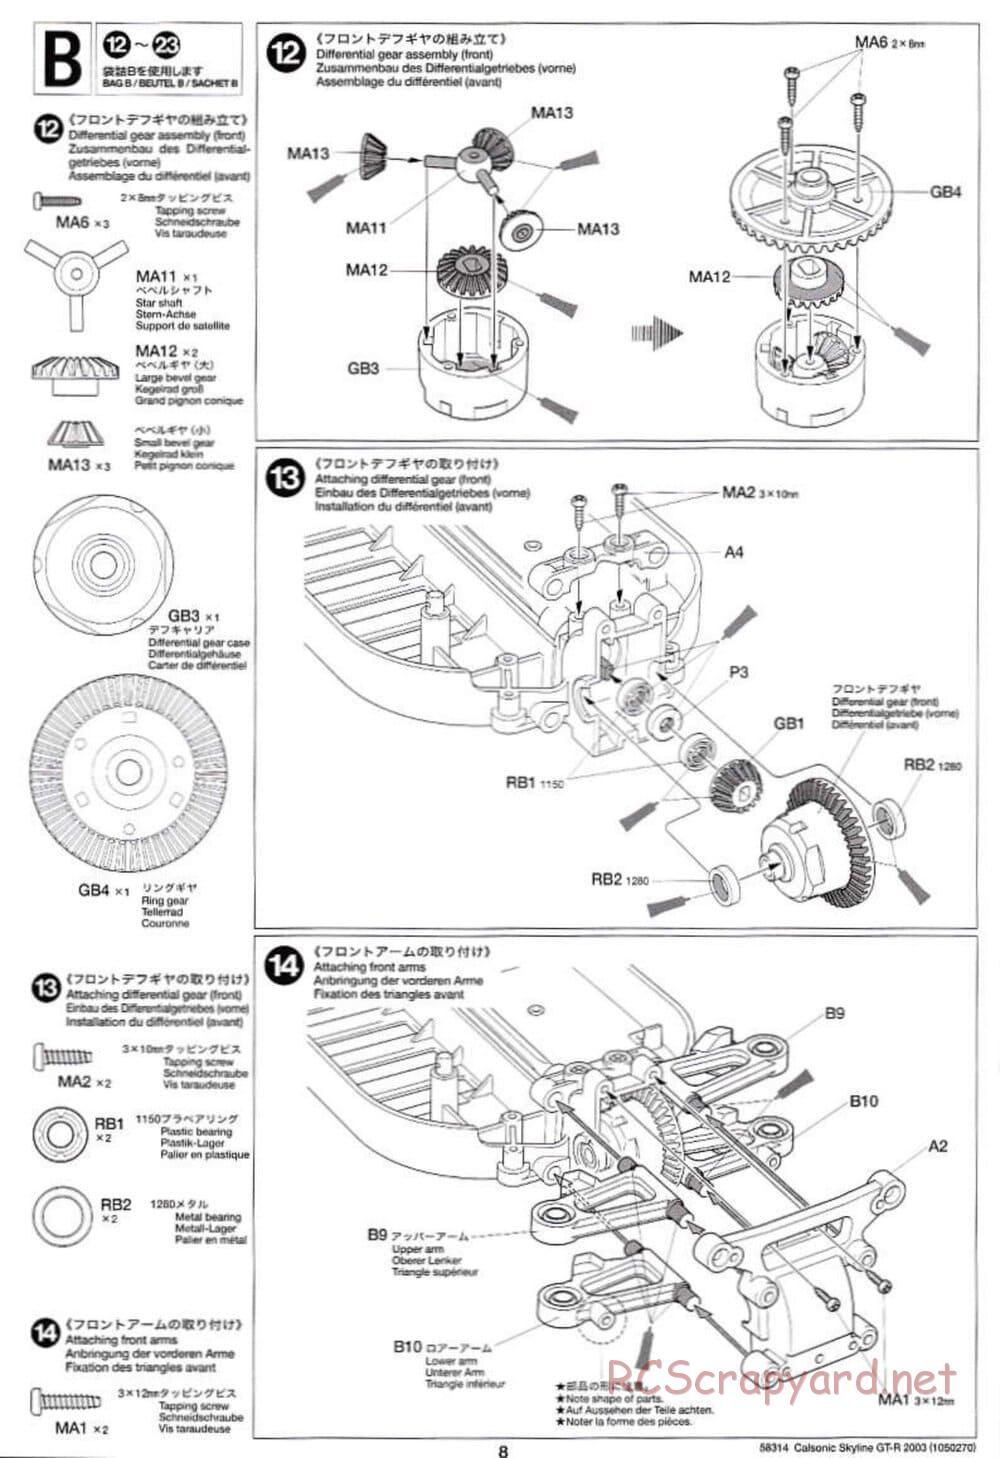 Tamiya - Calsonic Skyline GT-R 2003 - TT-01 Chassis - Manual - Page 8